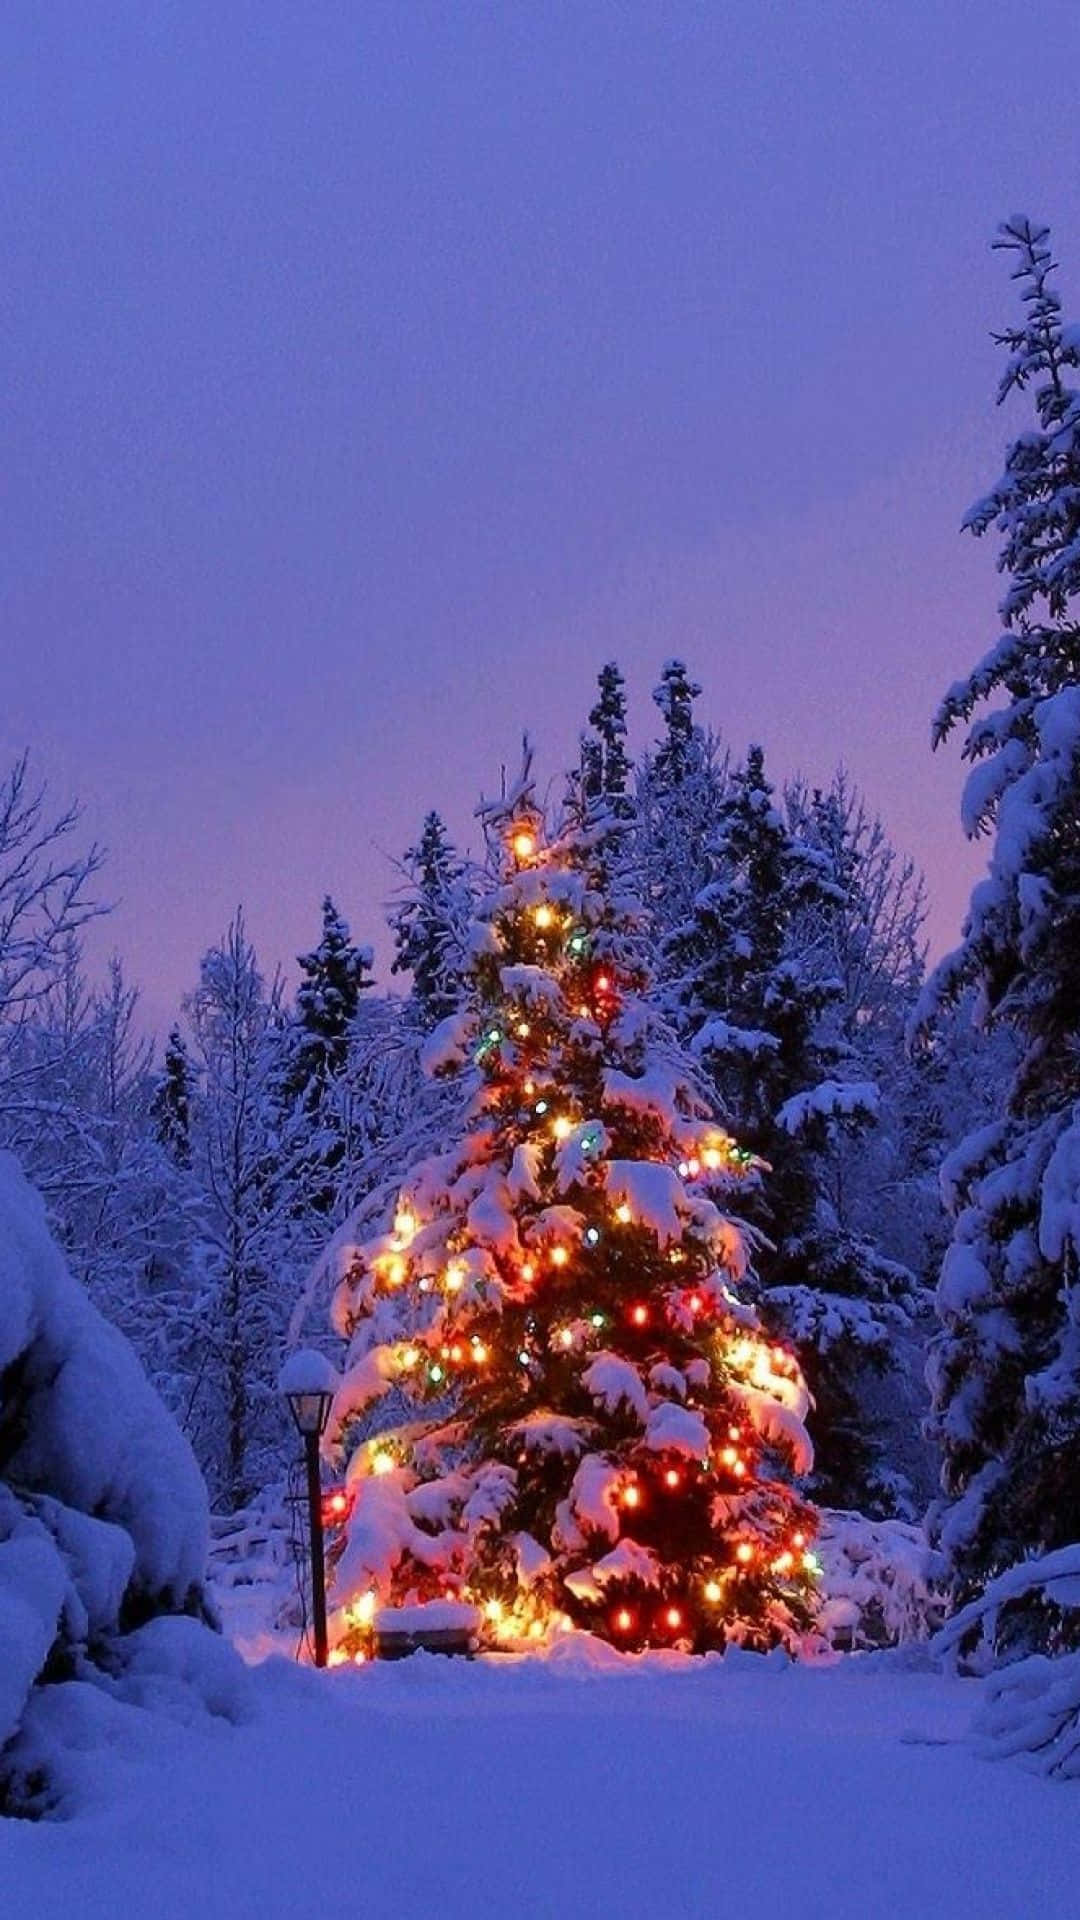 Download Enchanting Snowy Christmas Landscape | Wallpapers.com